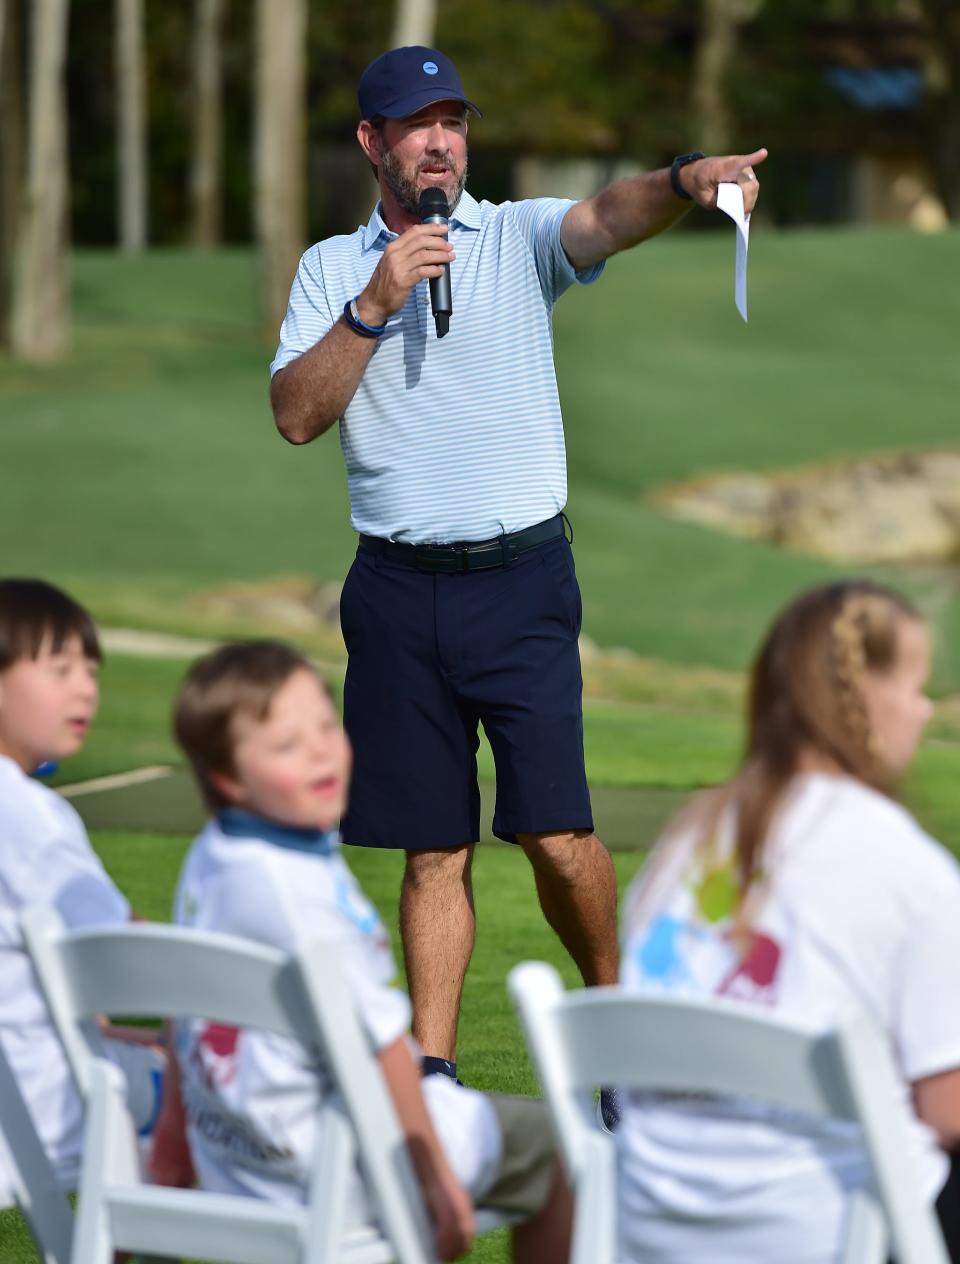 Paul Tesori thanks supporters during one of the All-Star Kids Golf Clinics in 2022 at The Yards in Ponte Vedra Beach.